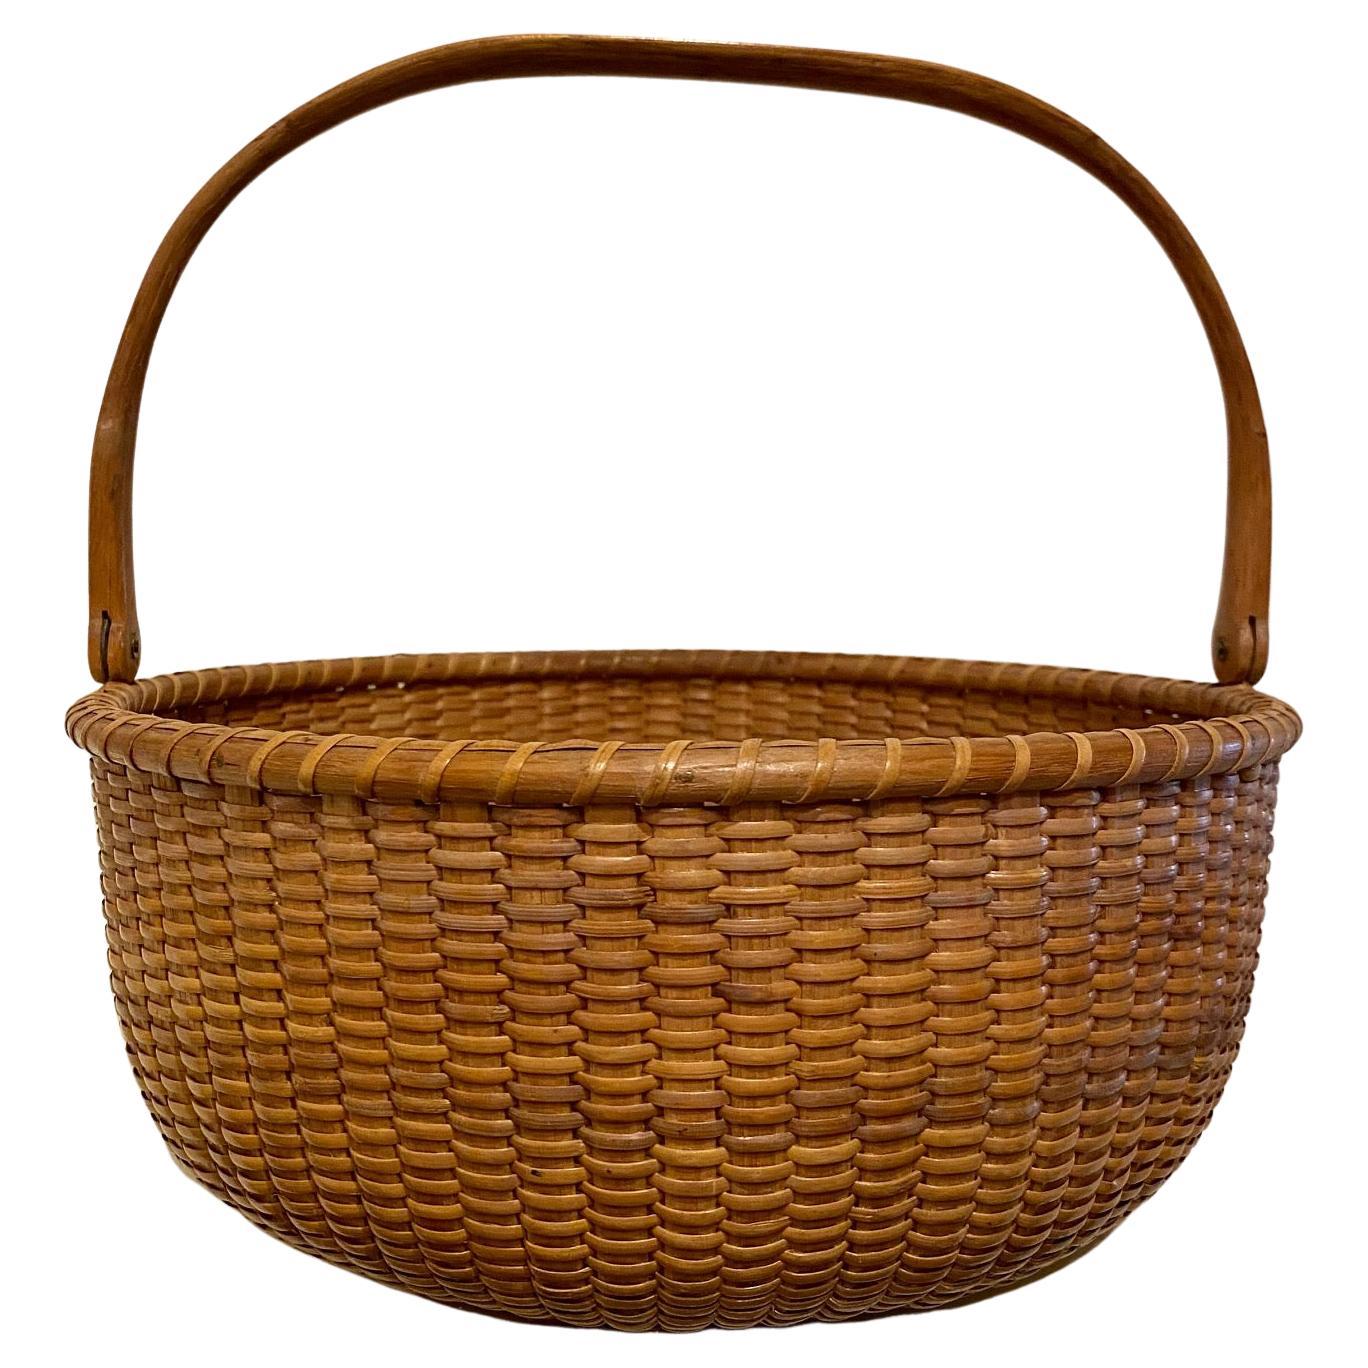 What is a fishing basket called?